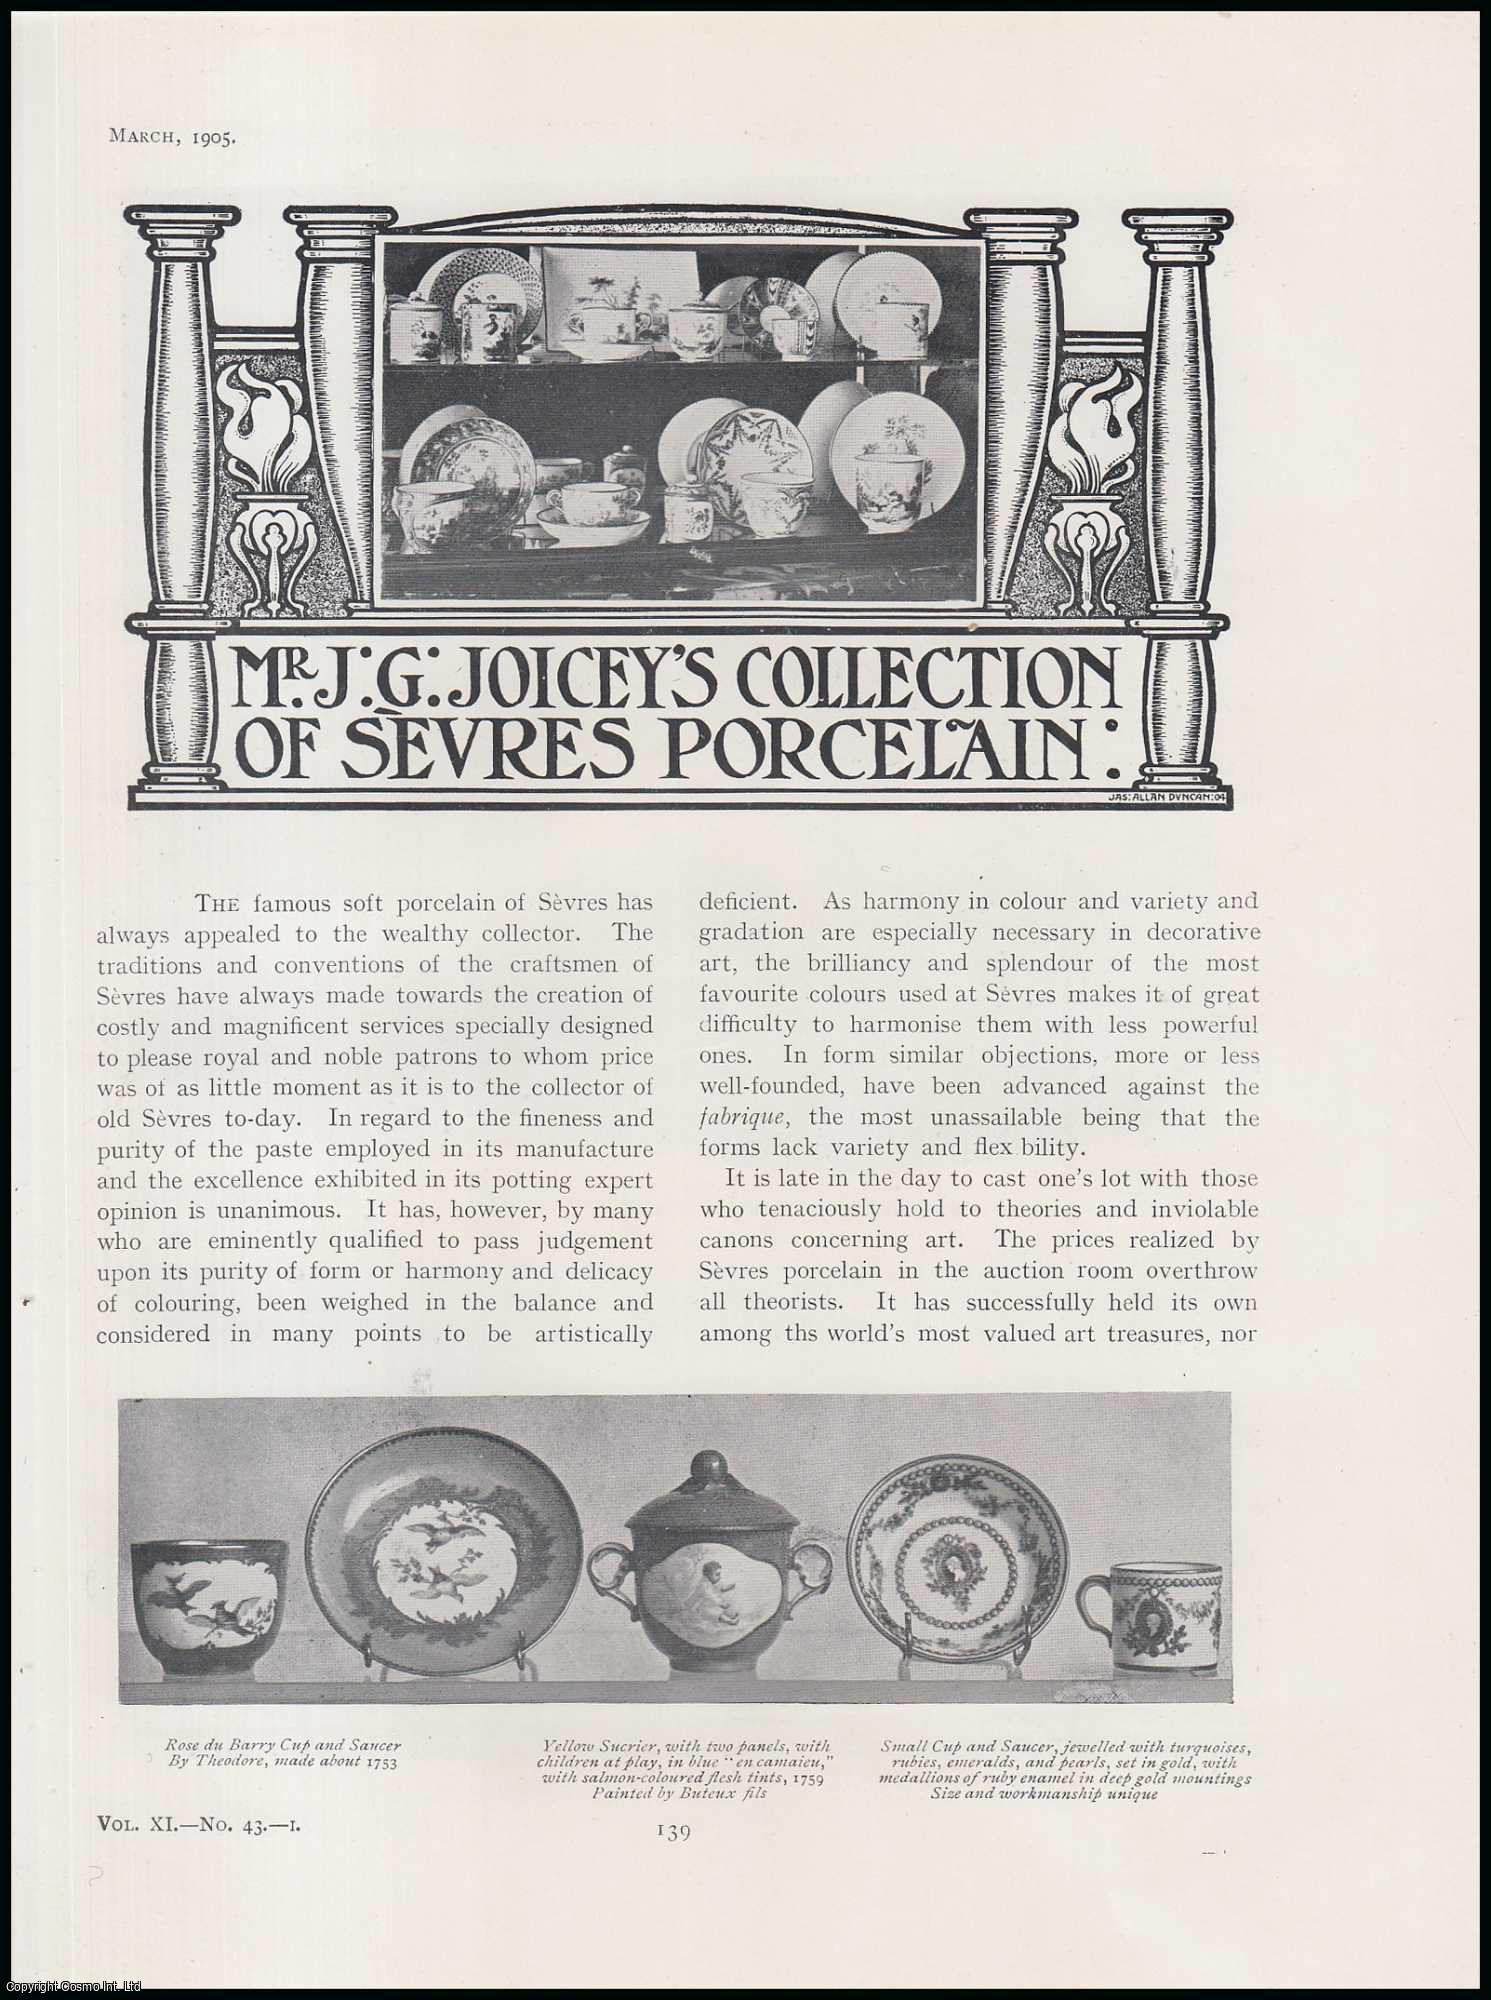 The Connoisseur - Mr. J.G. Joicey's Collection of Sevres Porcelain. An original article from The Connoisseur, 1905.